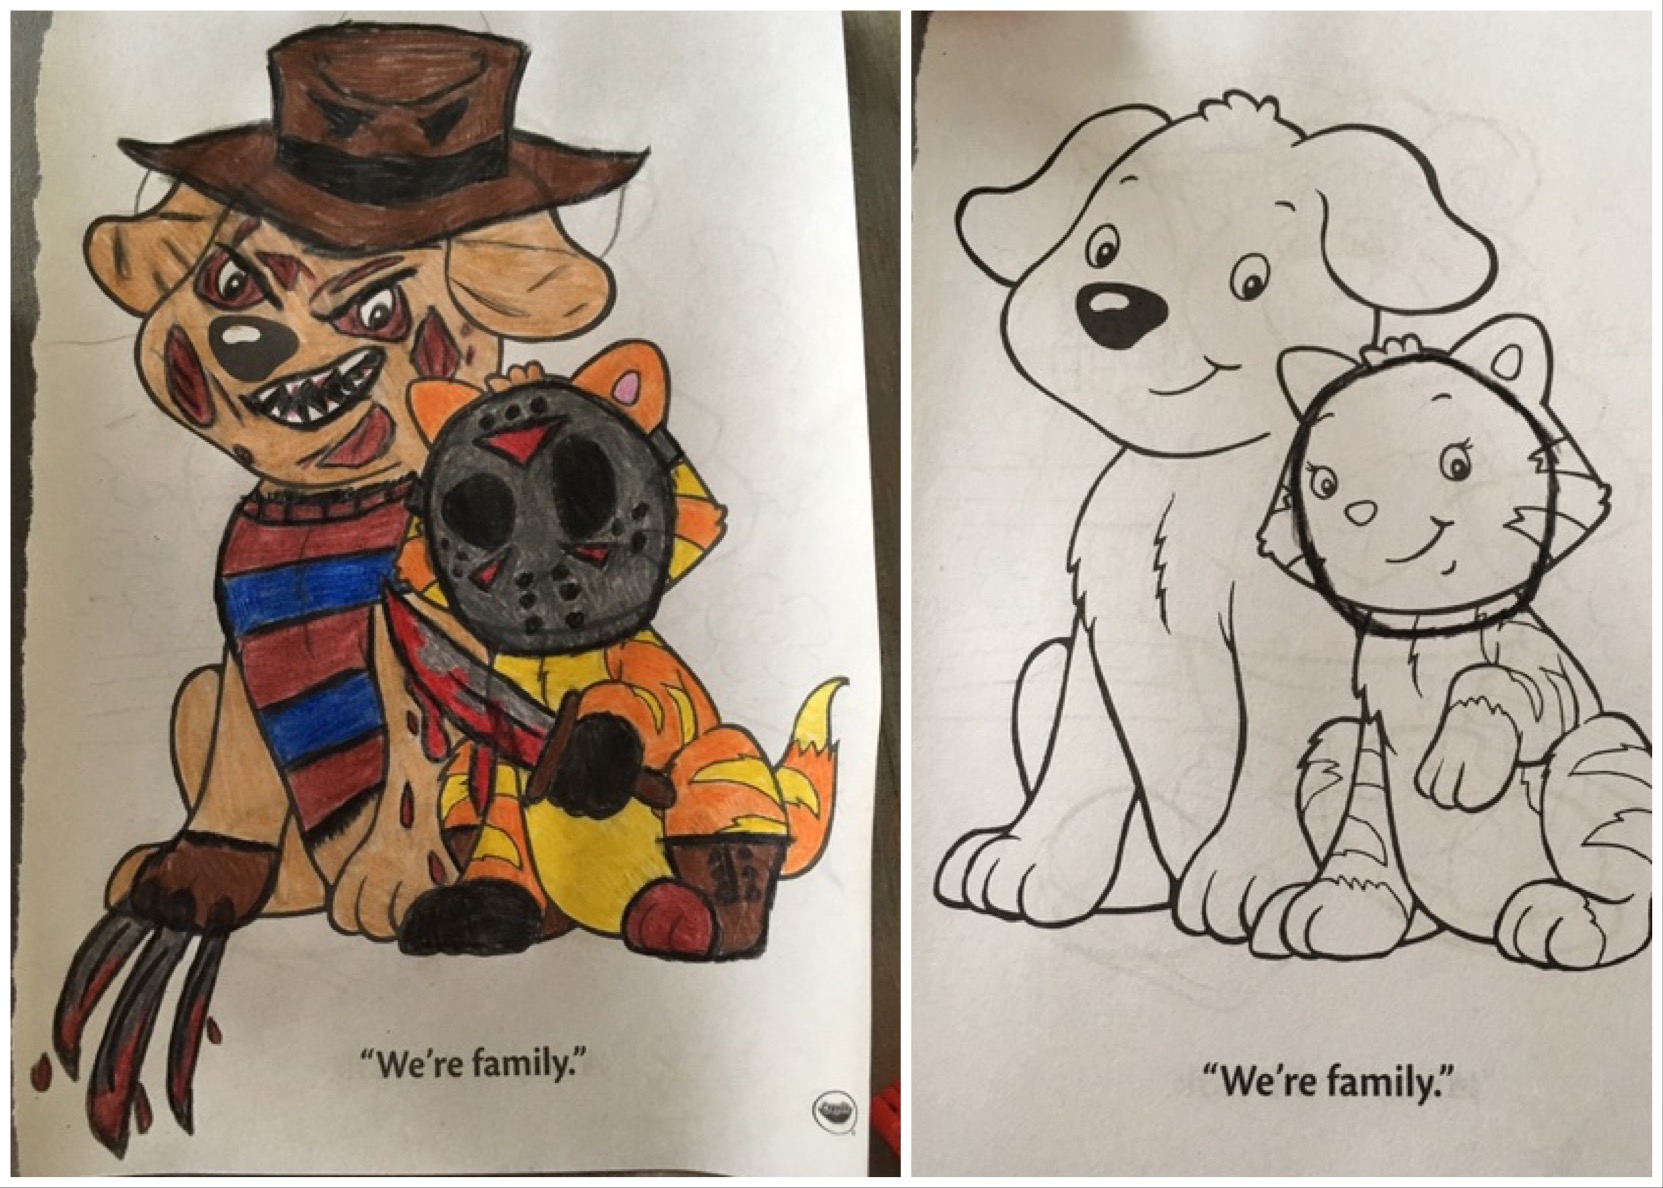 coloring book corruptions - too "We're family." "We're family."